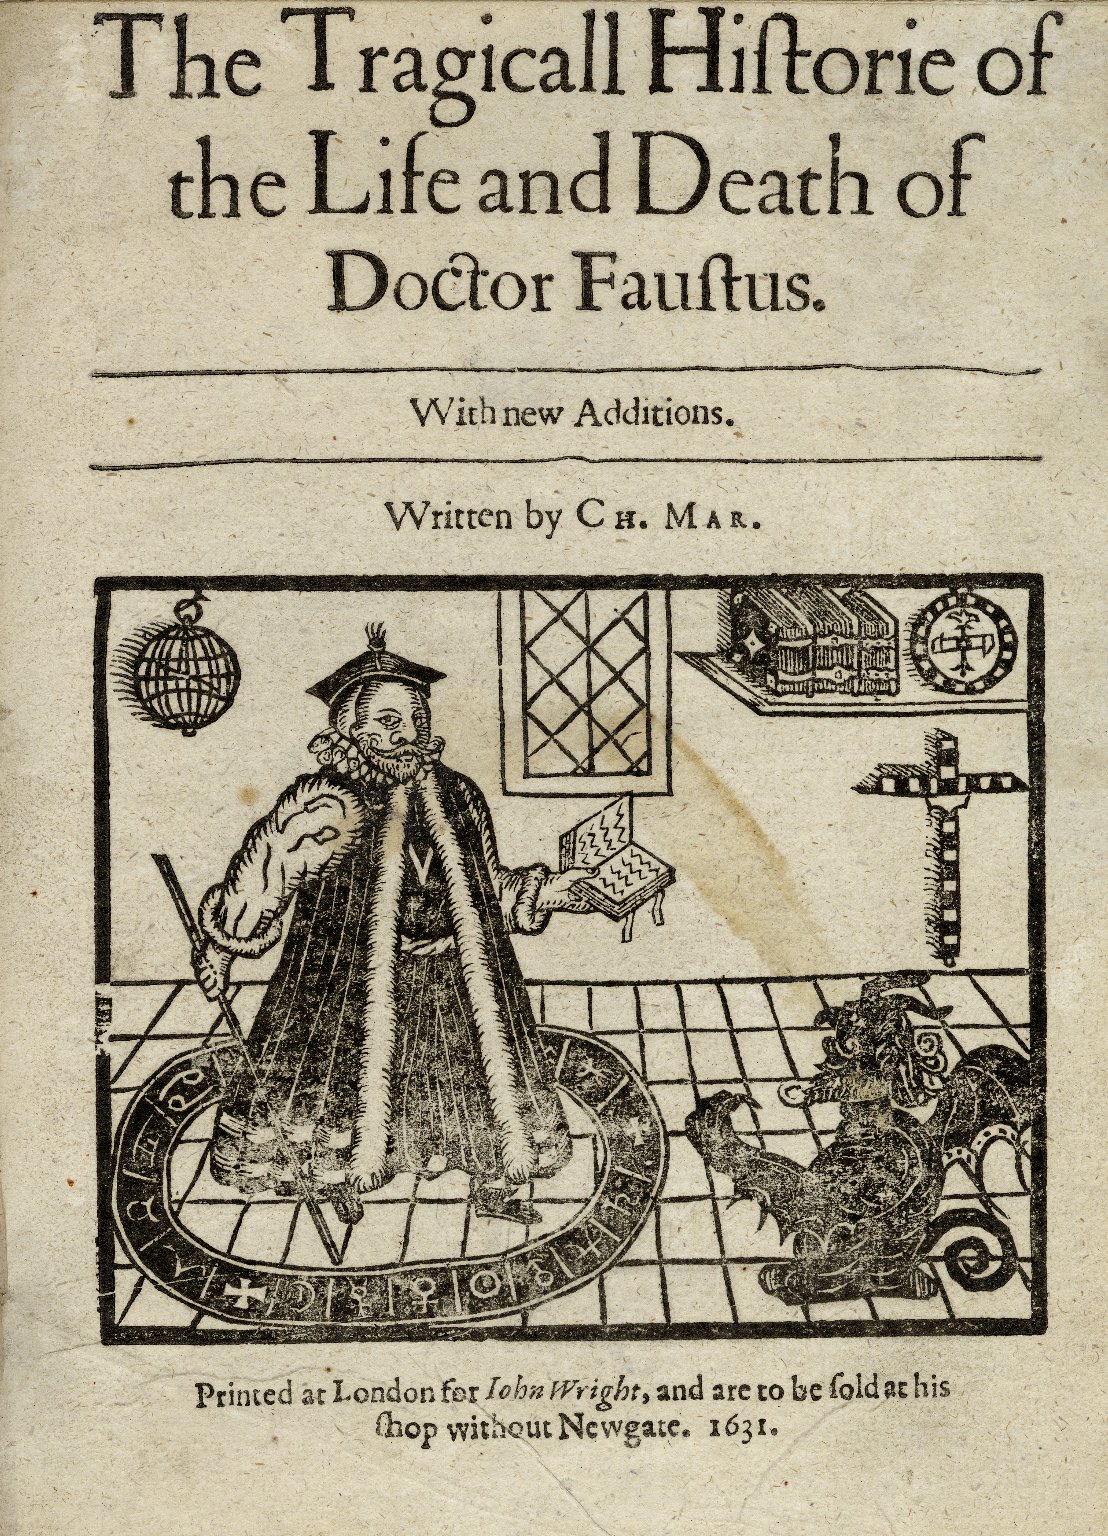 An image of the title page of Christopher Marlowe's "The Tragicall Historie of the Life and Death of Doctor Faustus".